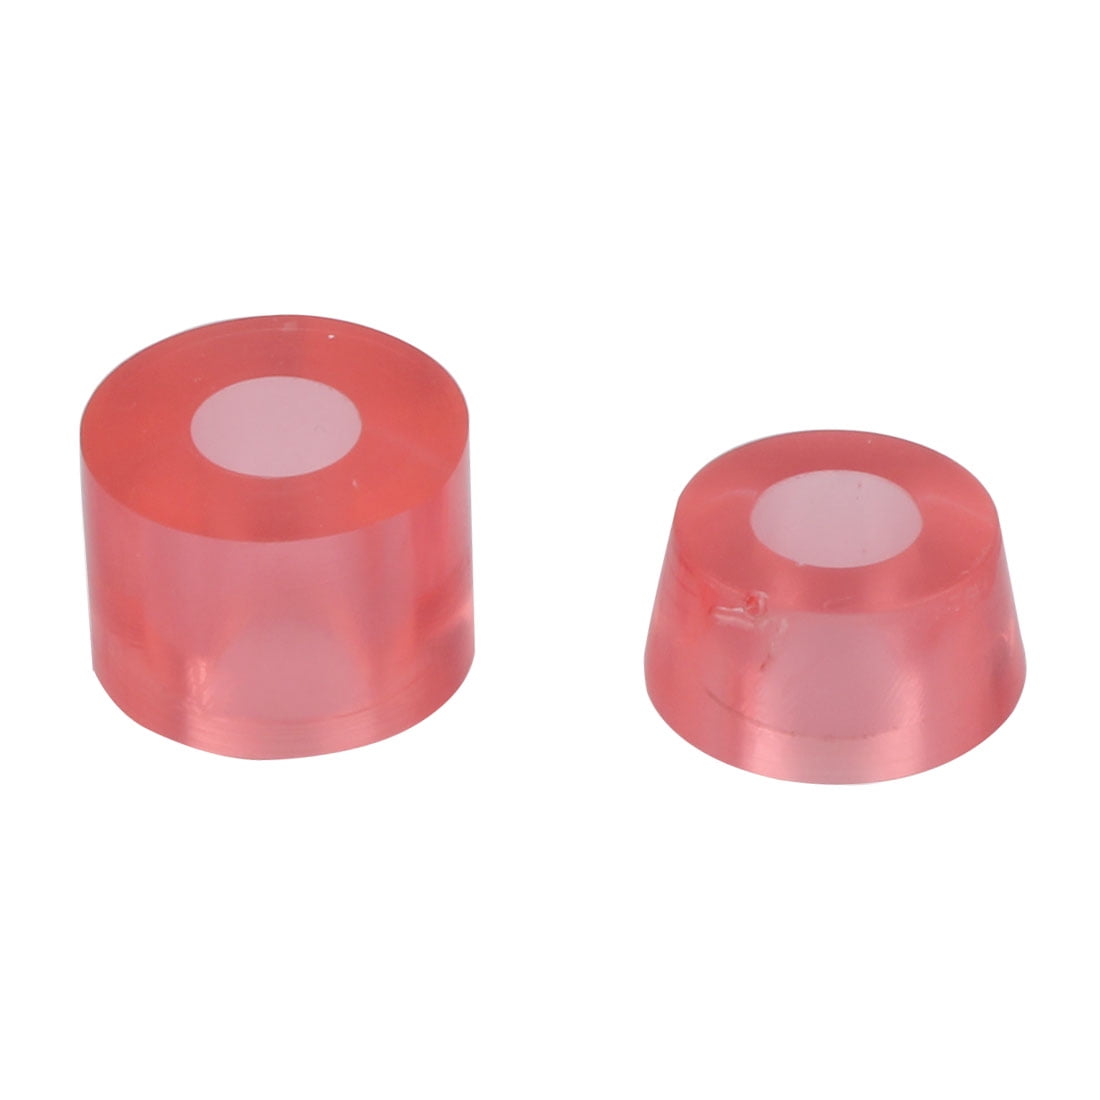 Outdoor Sports Skateboard Bushings Accessories Shock Absorber Clear Red 2 in 1 